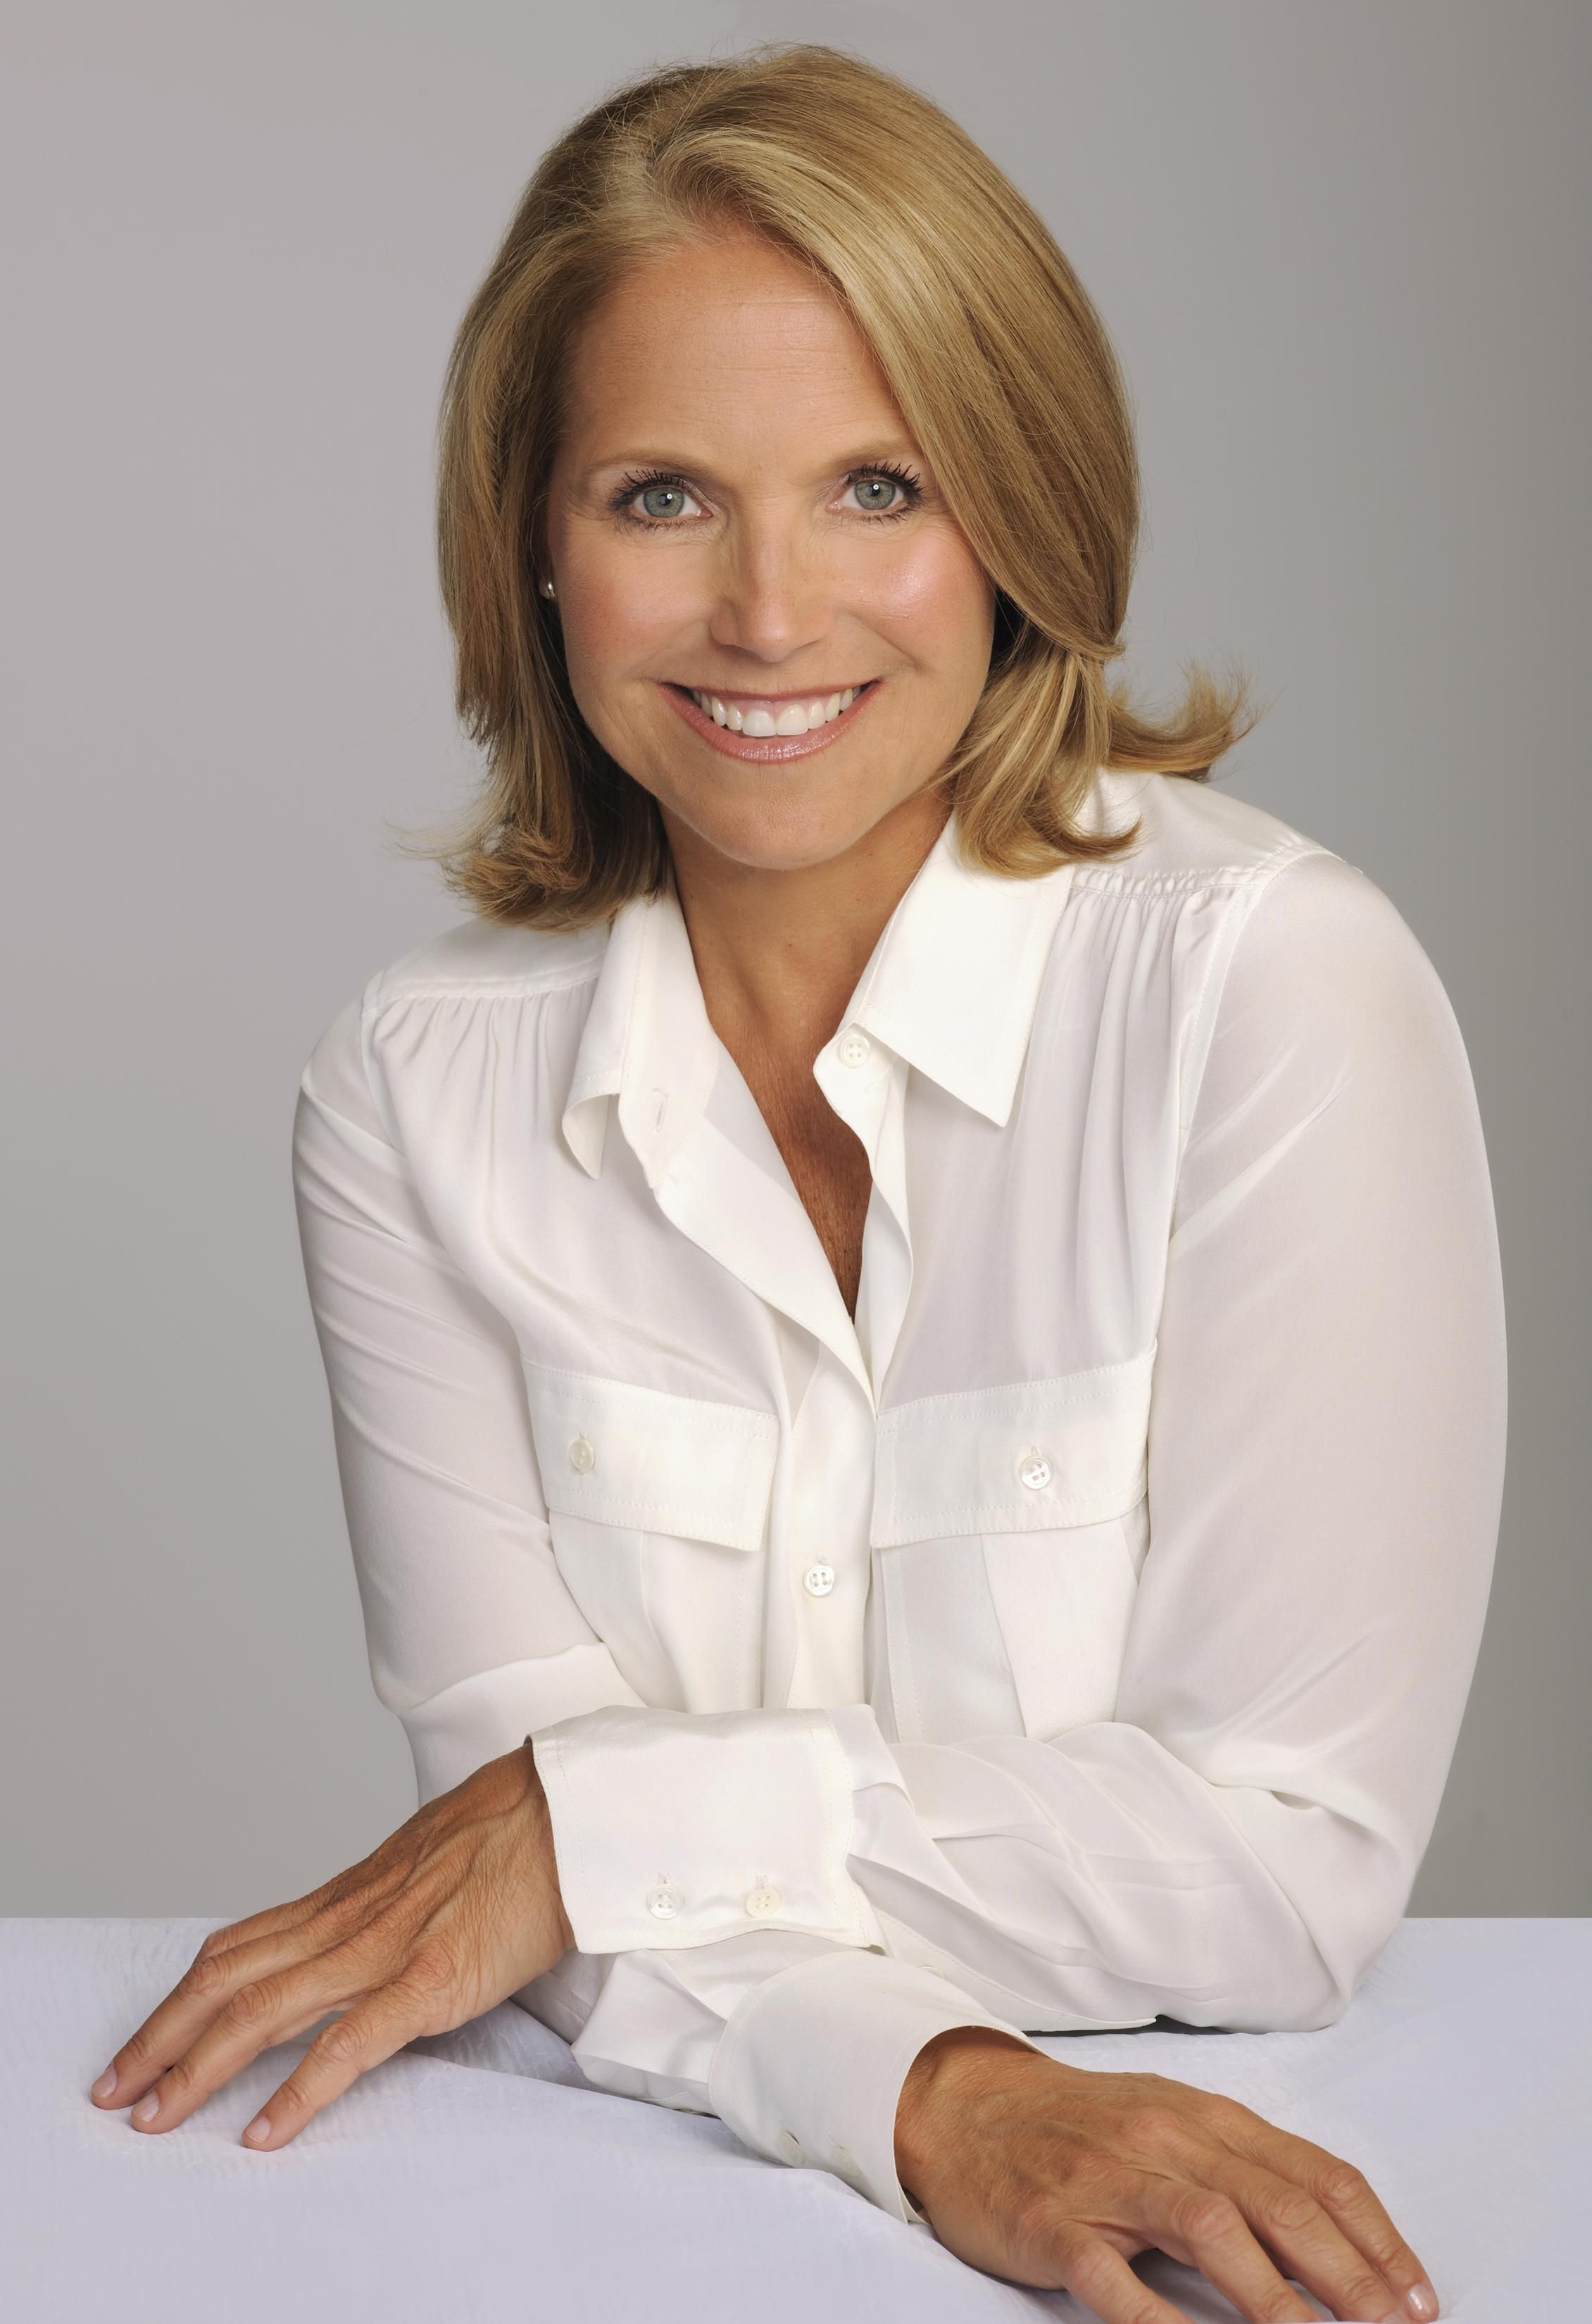 Pictures Of Katie Couric